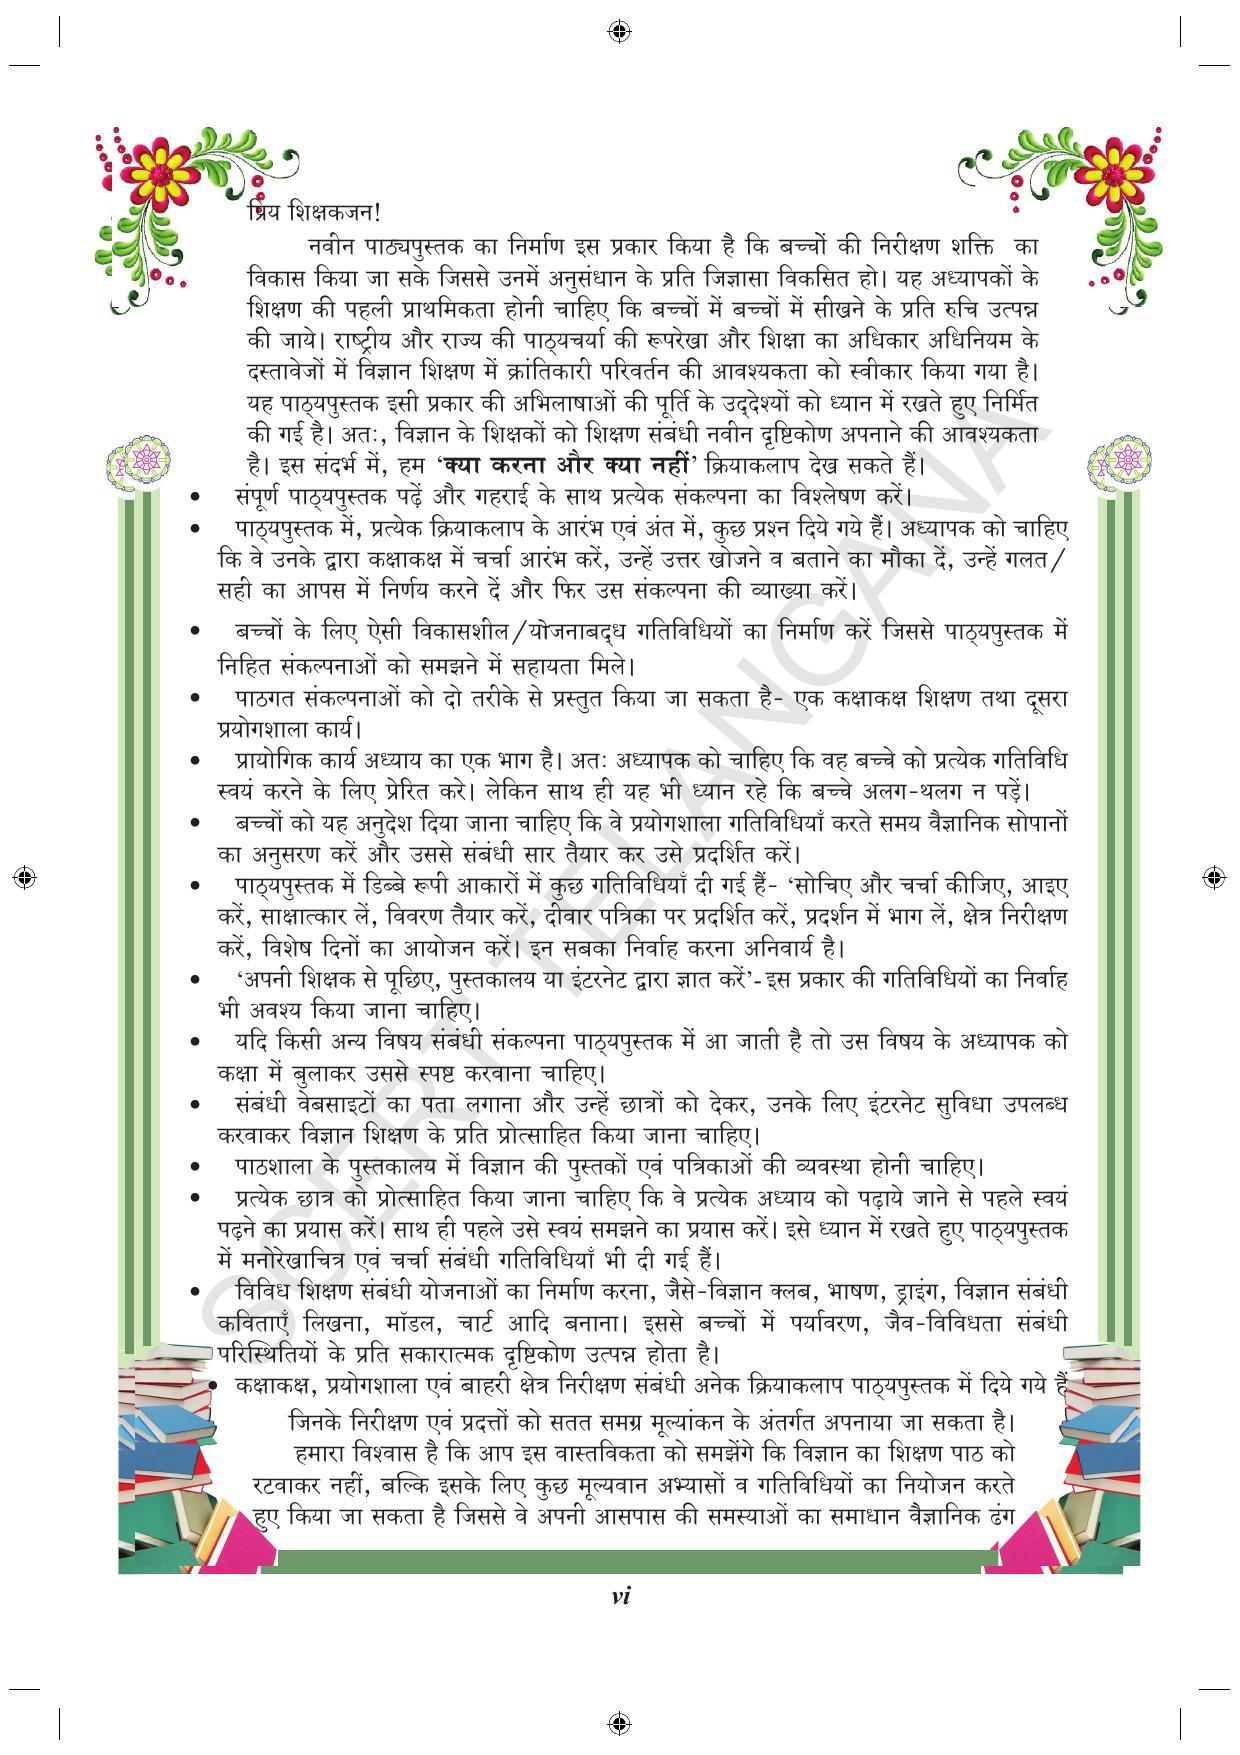 TS SCERT Class 9 Biological Science (Hindi Medium) Text Book - Page 8